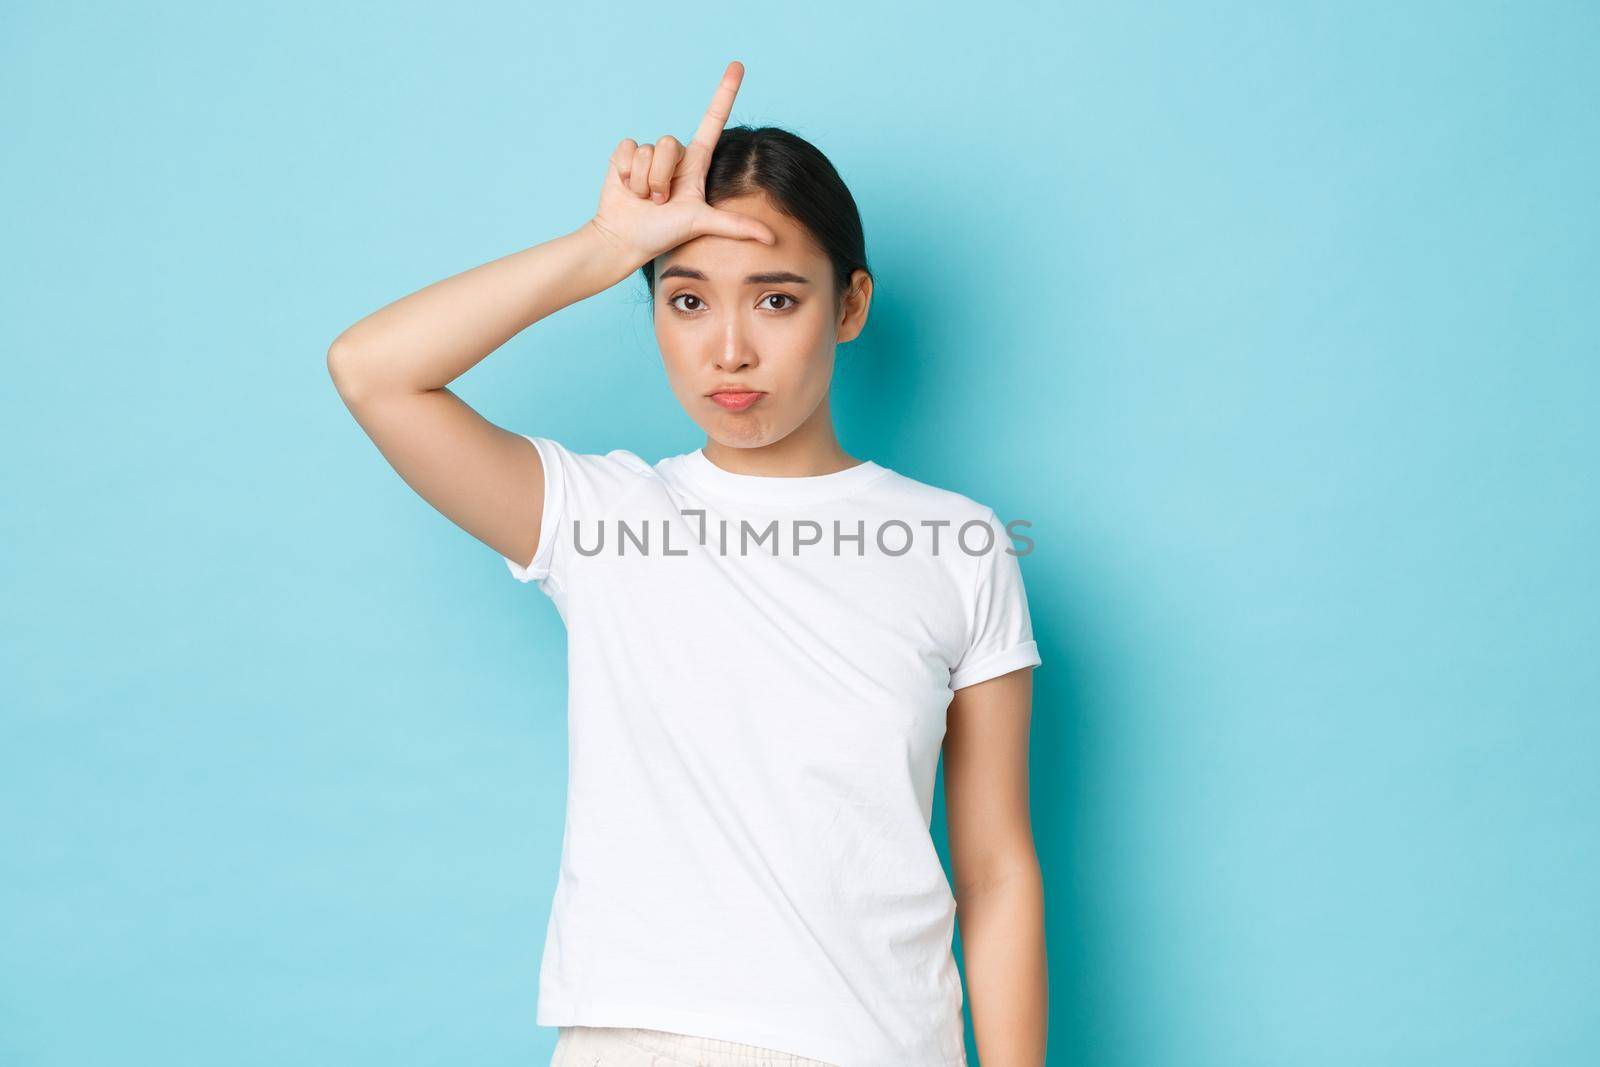 Sad and unconfident in herself asian girl wearing white casual t-shirt, sulking and looking glomy over lost competition, showing loser gesture on forehead, standing blue background.